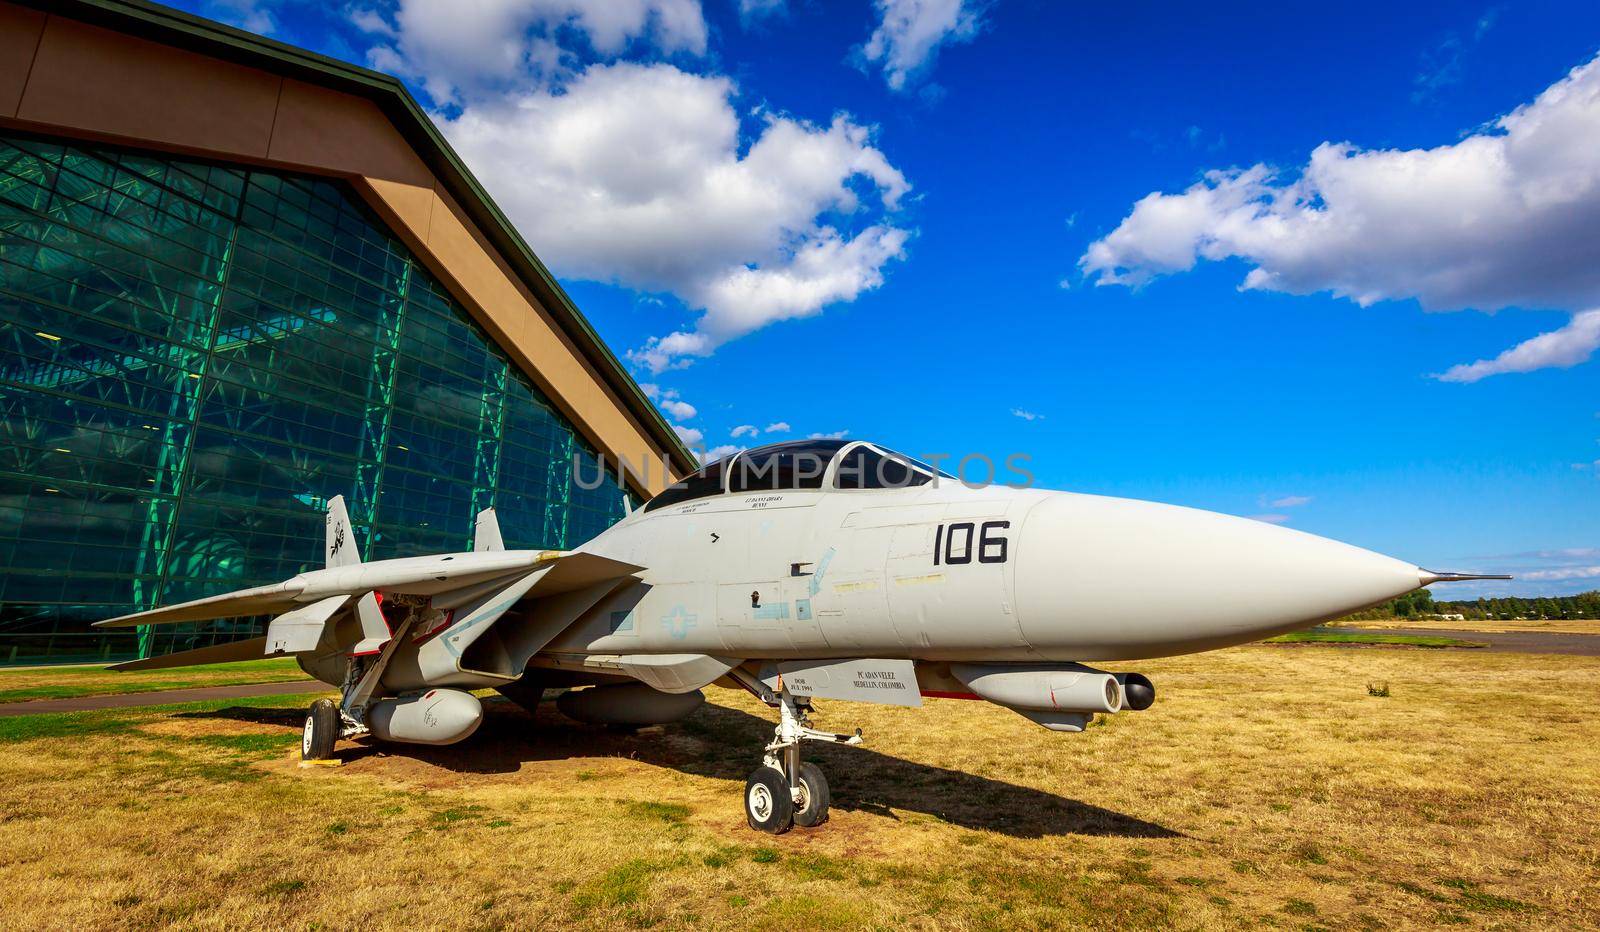 McMinnville, Oregon - August 31, 2014: Military fighter aircraft Grumman F-14 Tomcat on exhibition at Evergreen Aviation & Space Museum.